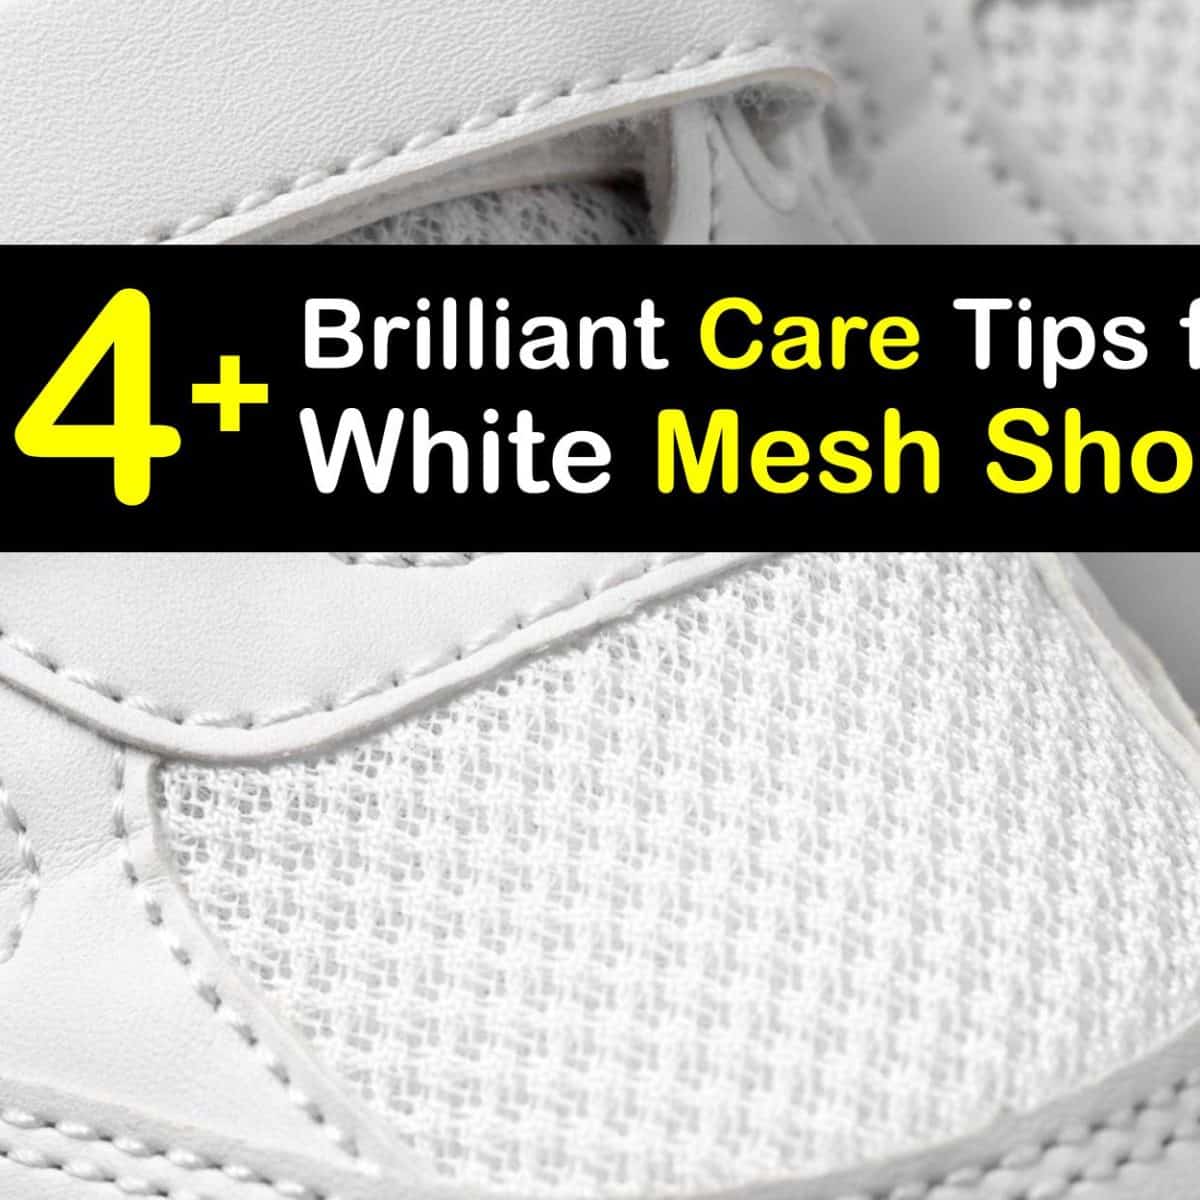 pegamento Roca capital White Mesh Shoe Care - Smart Guide for Cleaning White Mesh Sneakers